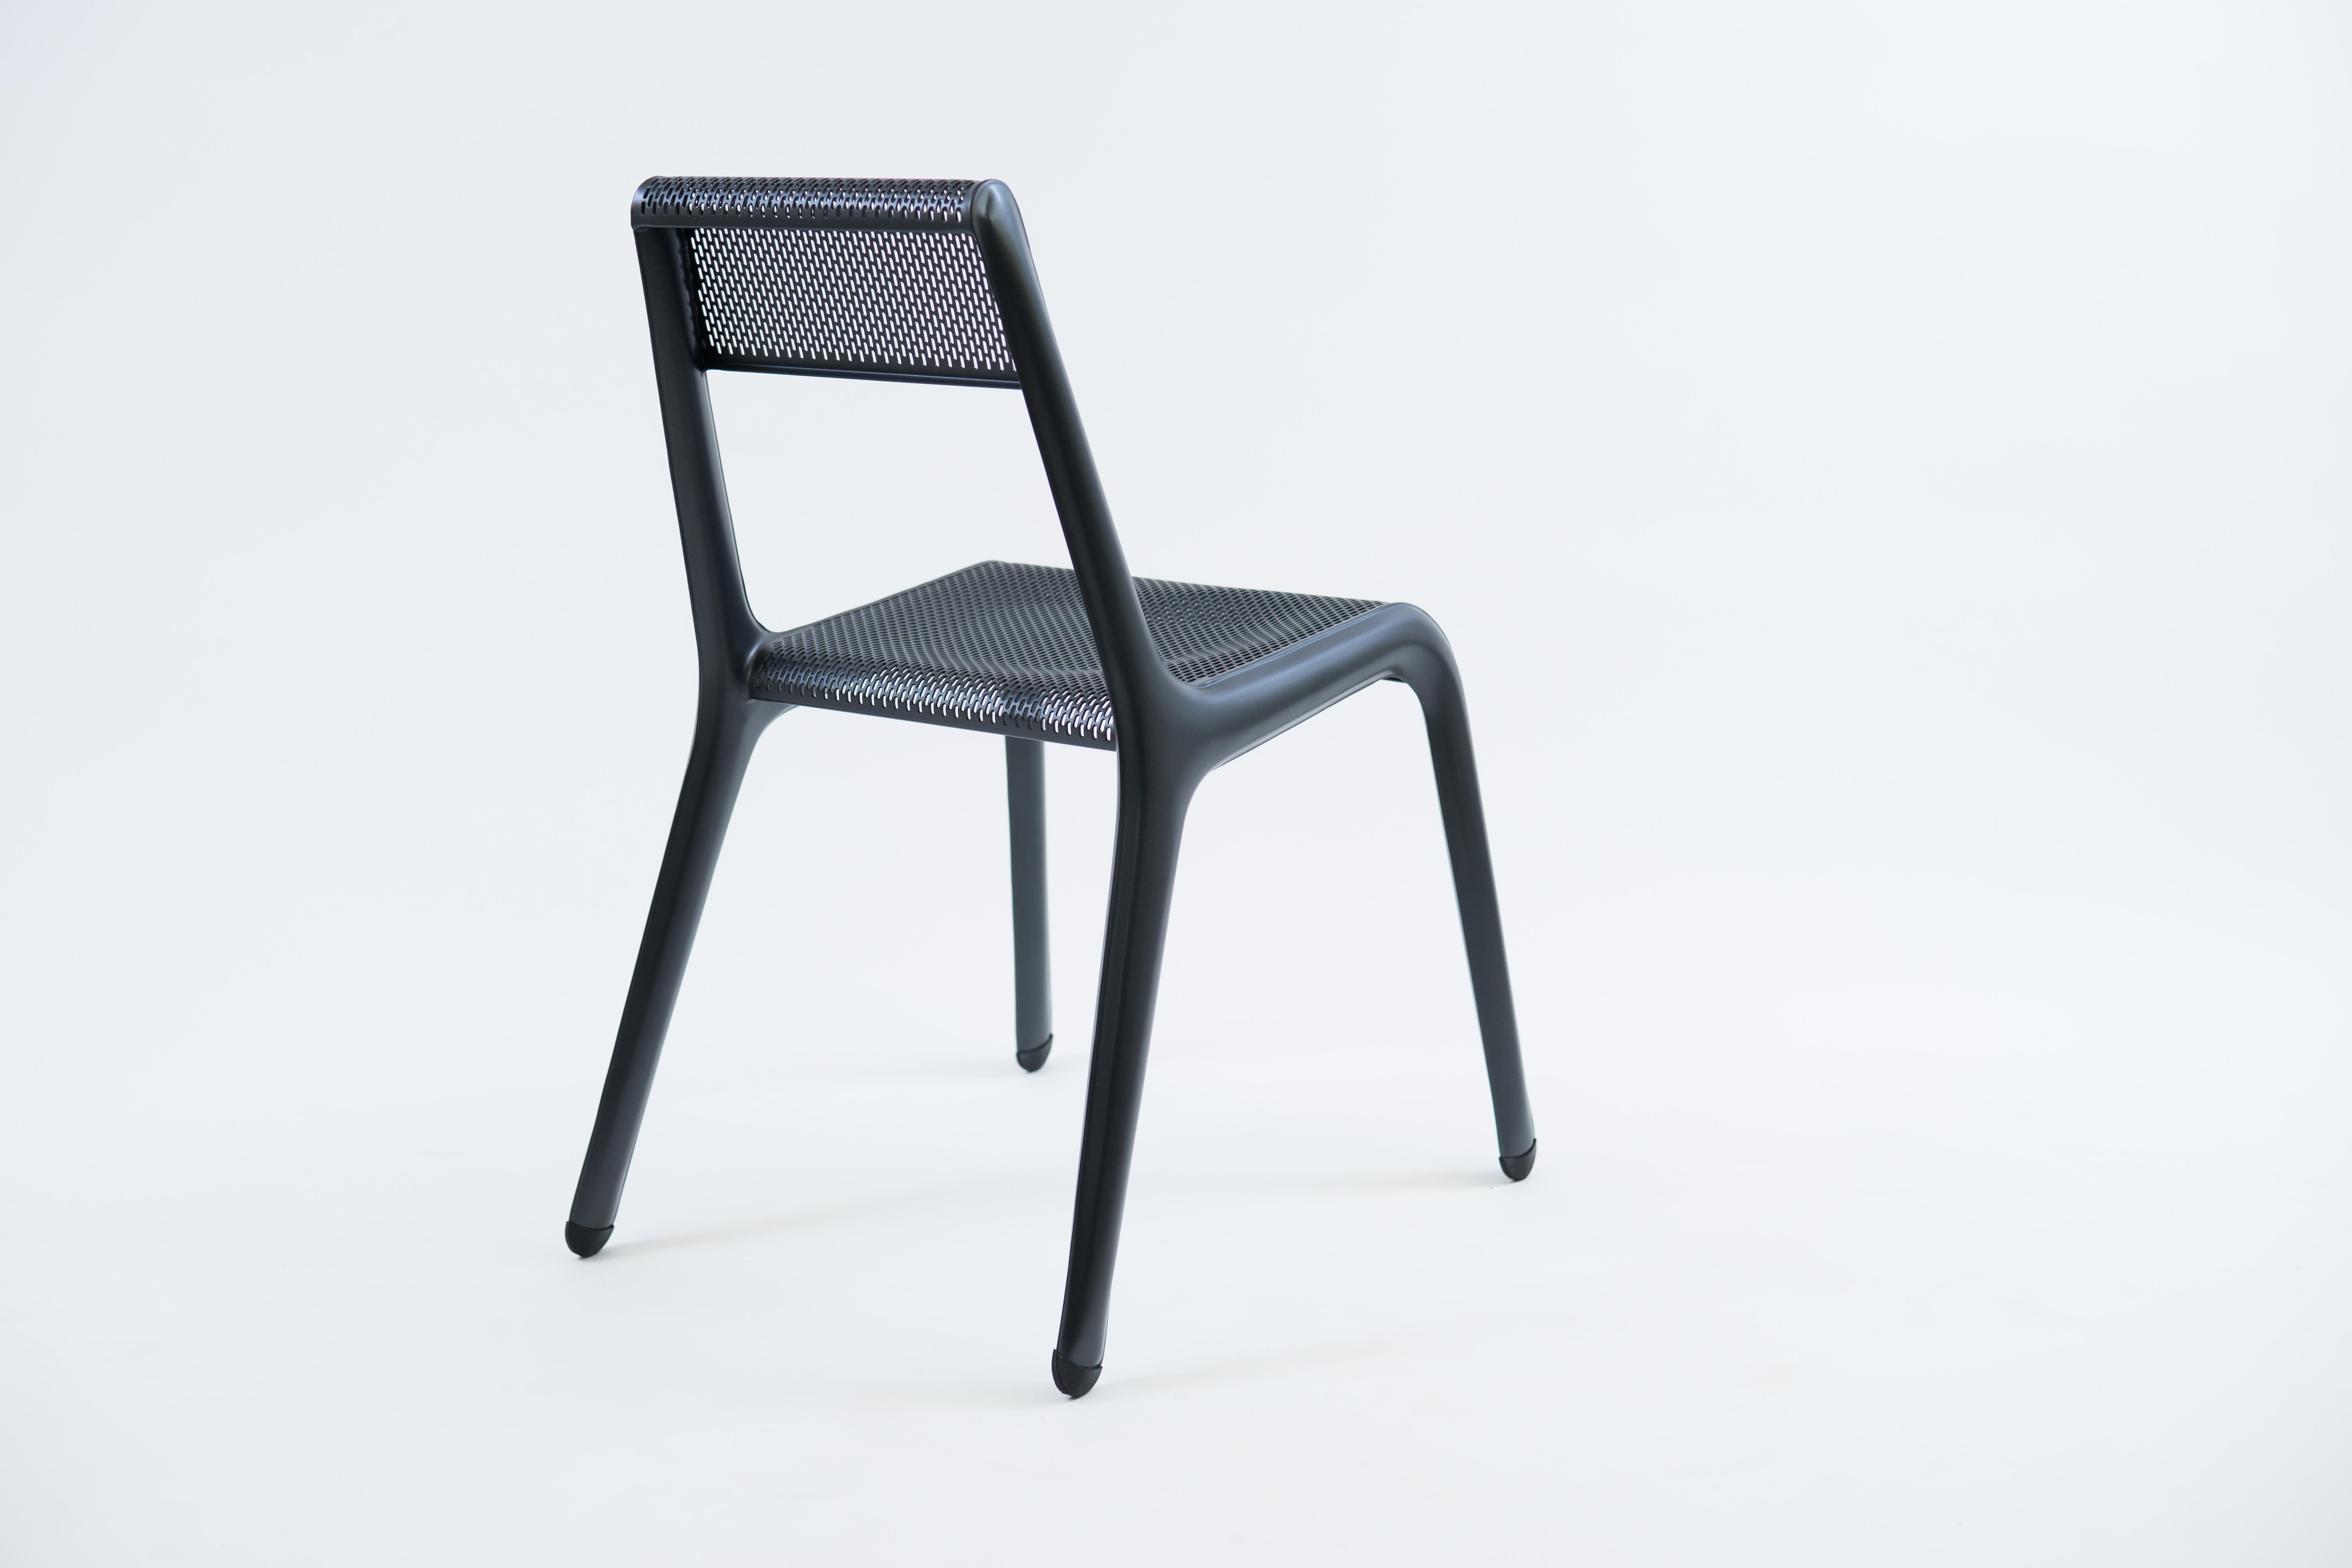 Black leggera chair by Zieta
Dimensions: D 58 x W 49 x H 78 cm 
Material: Carbon steel. 
Finish: Powder-coated.
Available in other colors. Also available in Ultraleggera version.


LEGGERA chair is a steel seating with clean lines and simple form.